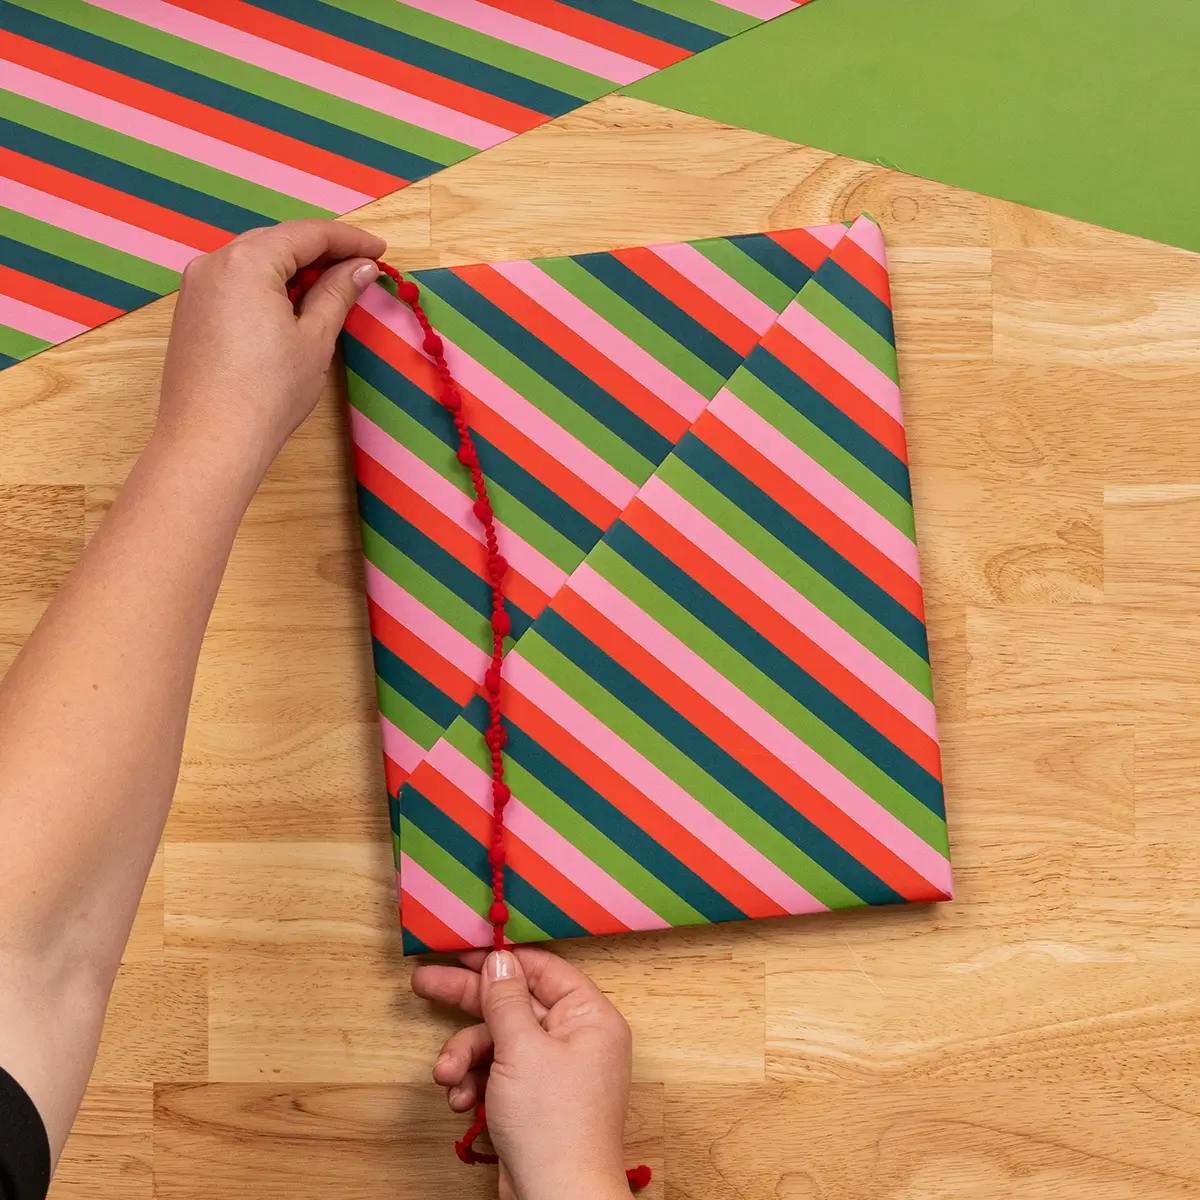 Adding a final ribbon to a book wrapped in Christmas wrapping paper.